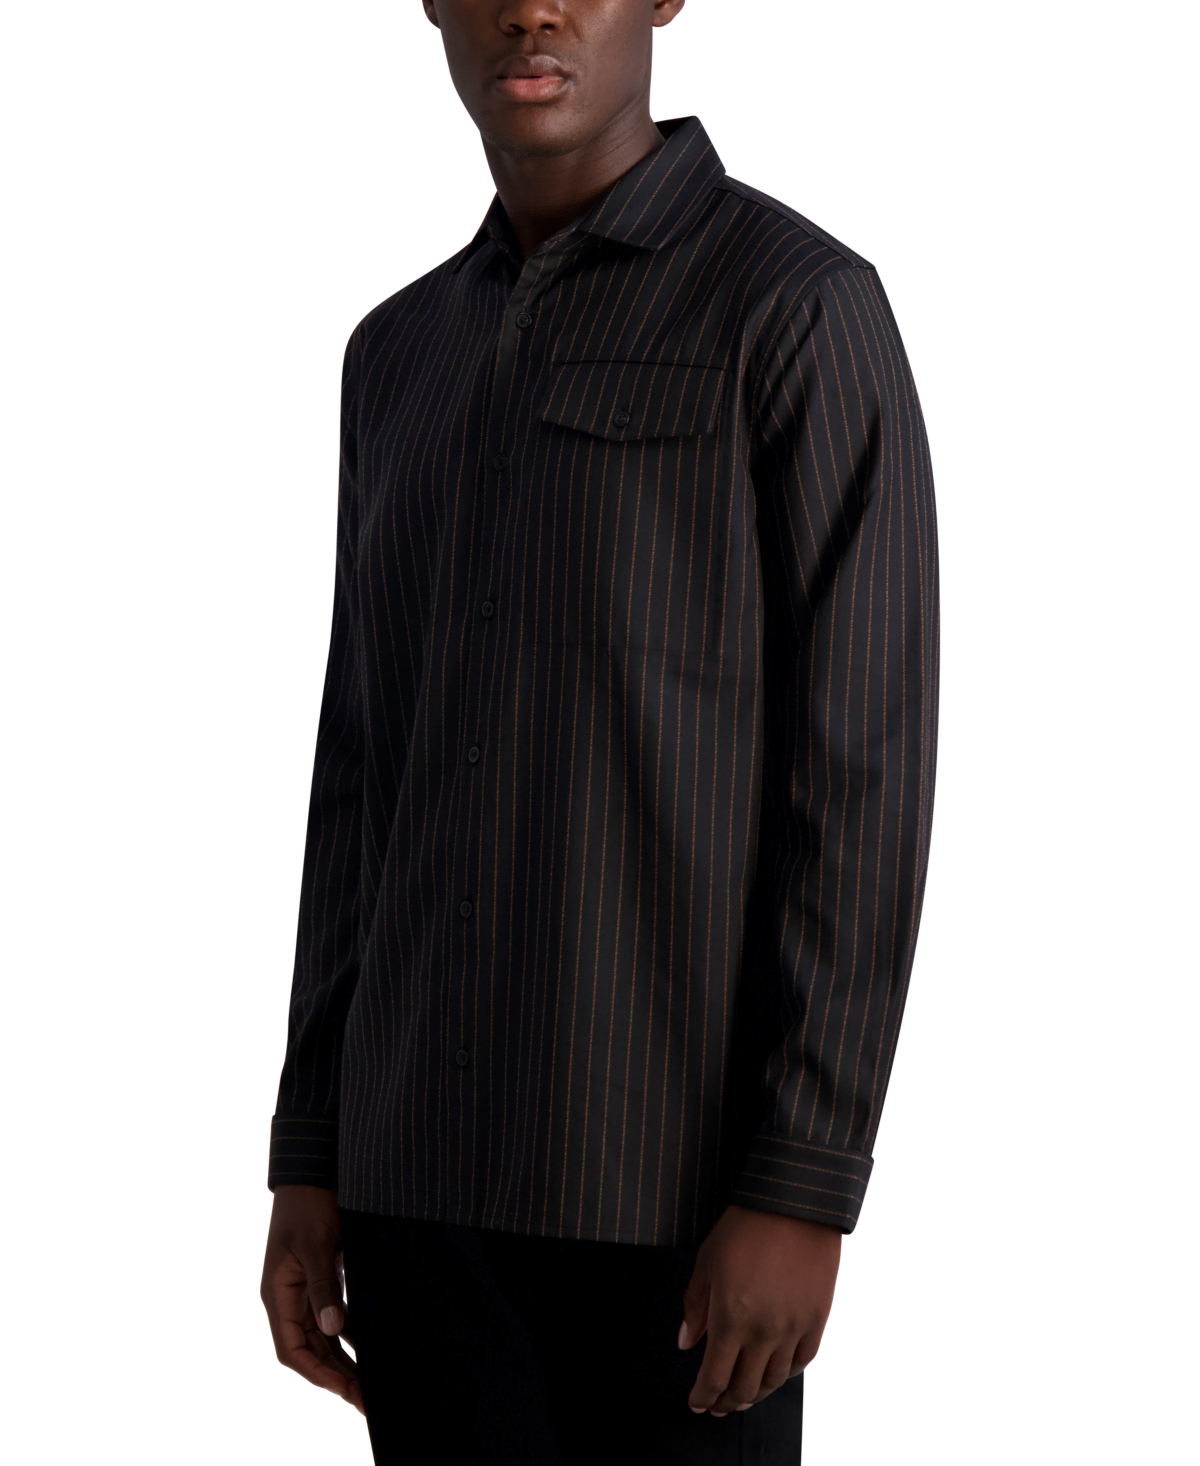 Karl Lagerfeld Men's Oversized Striped Textured Long Sleeve With Chest Pocket Shirt Jacket In Black